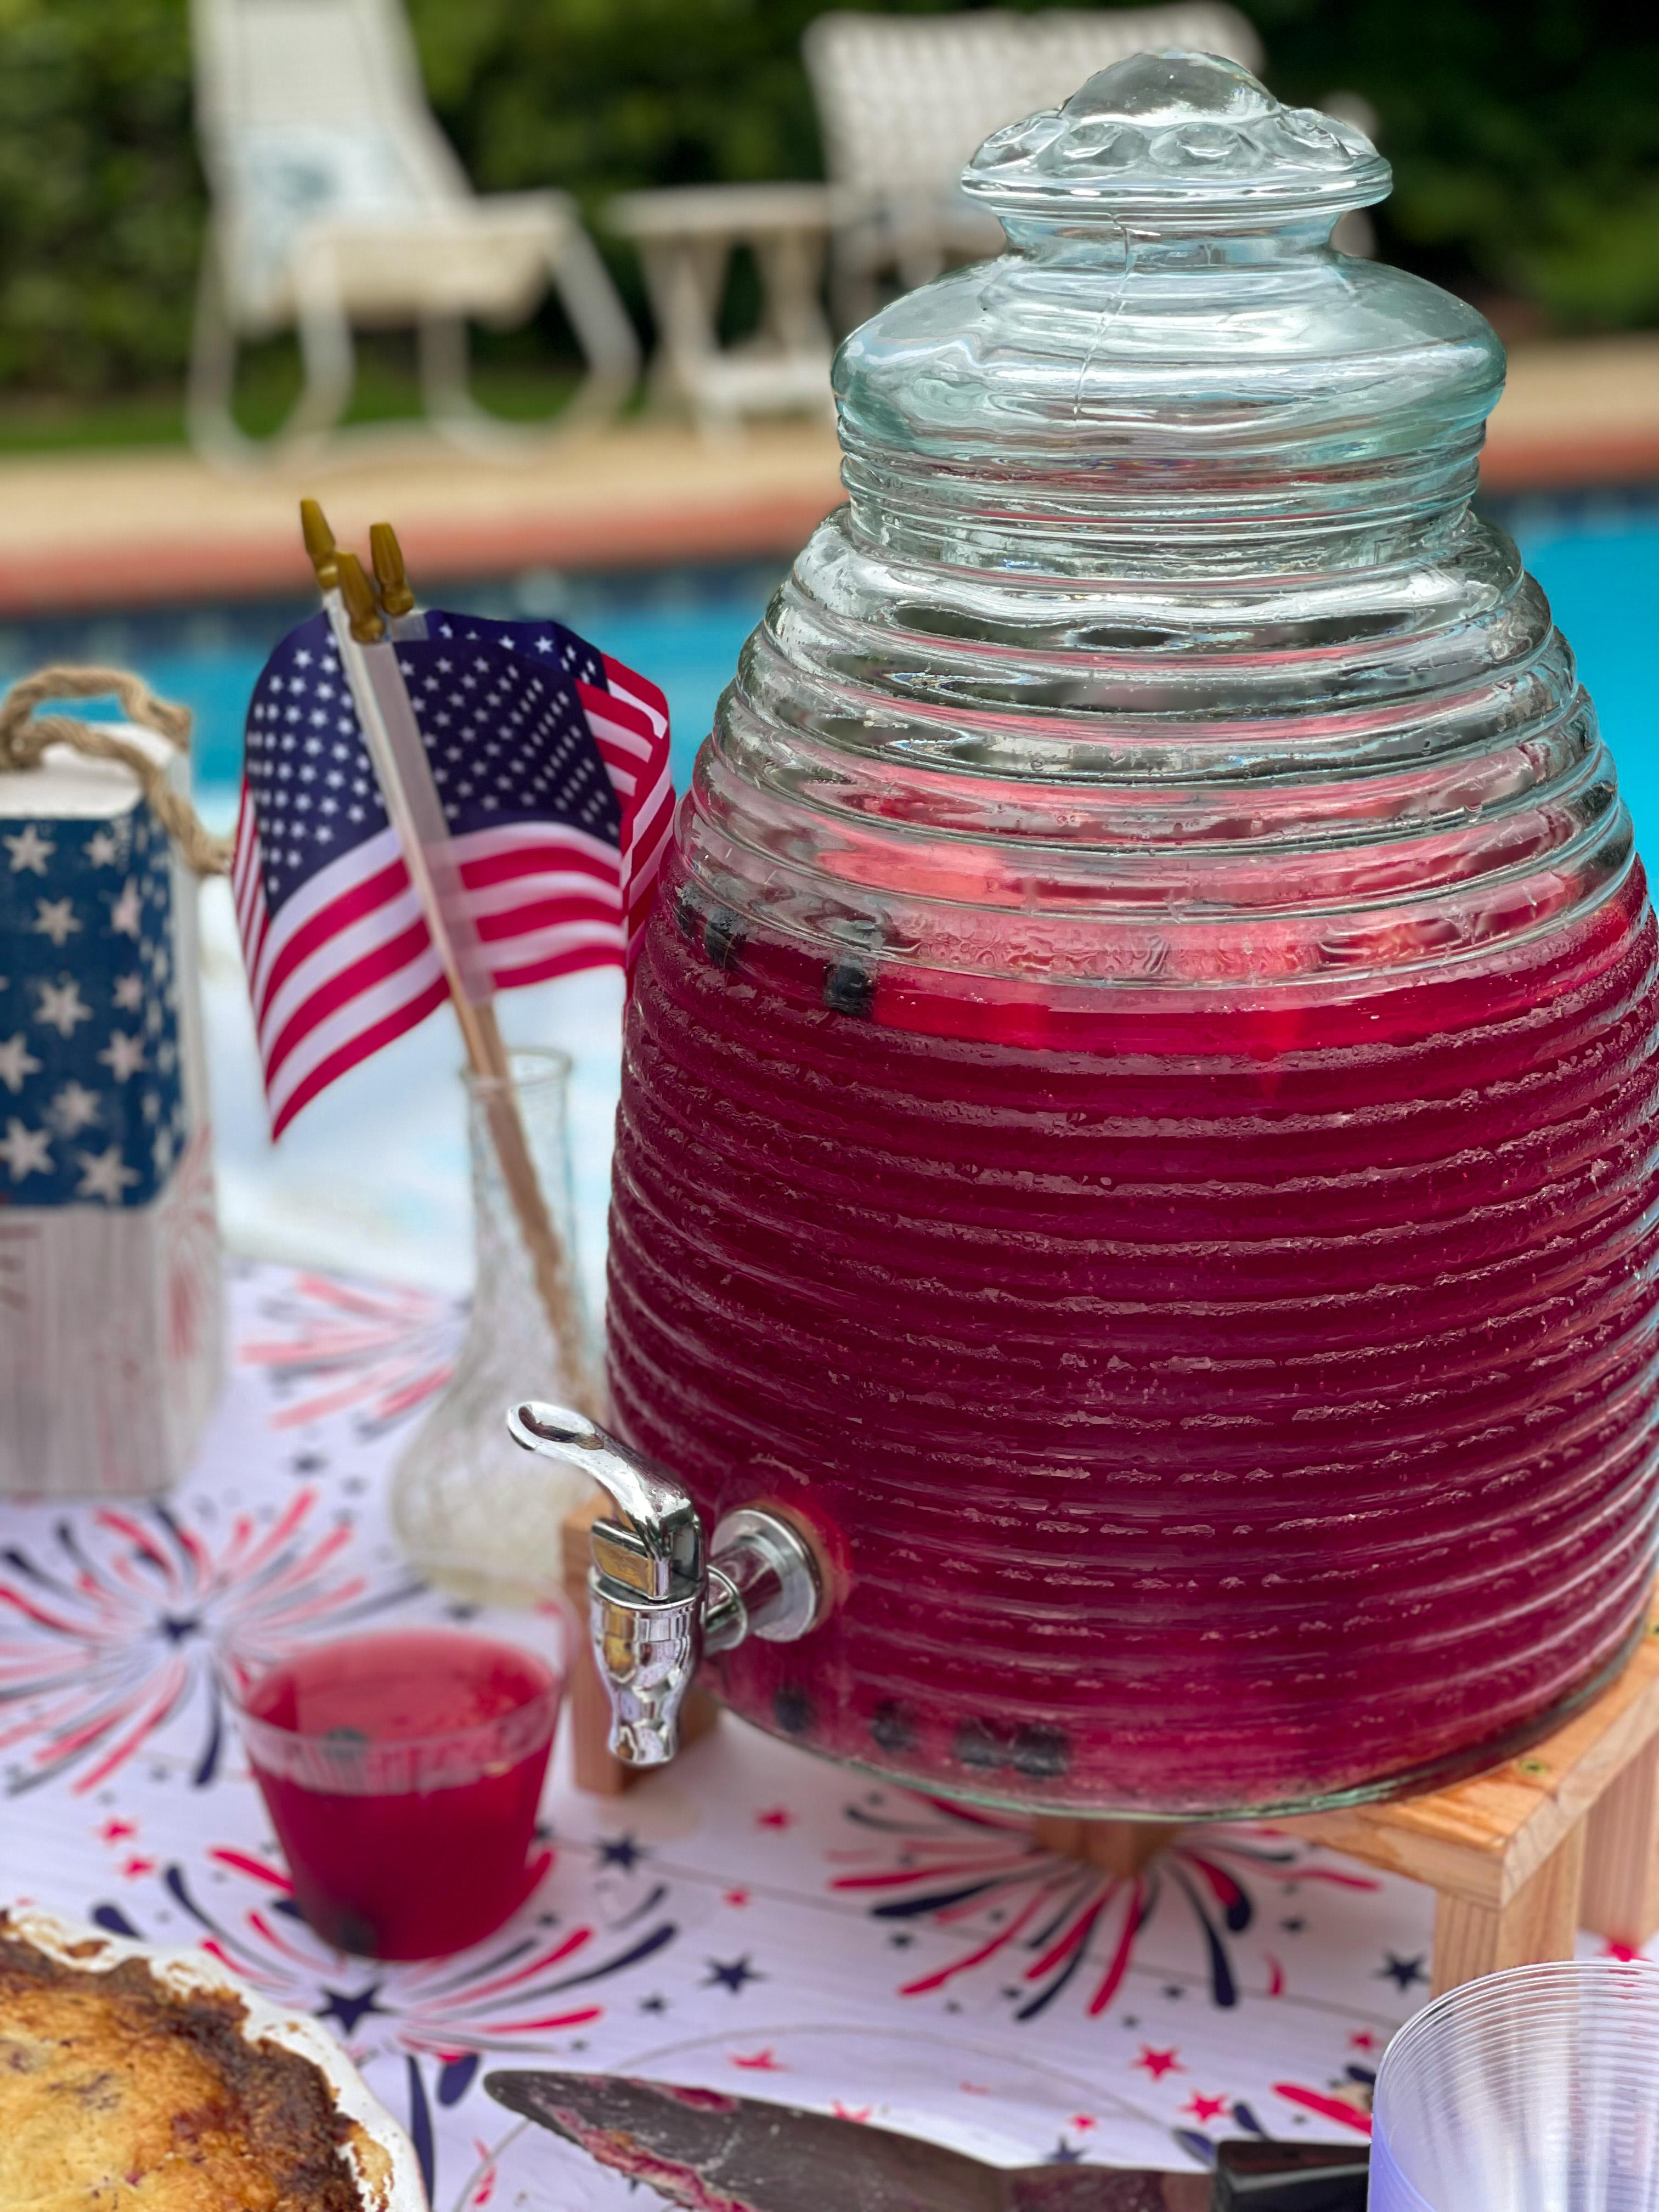 Star Spangled Punch